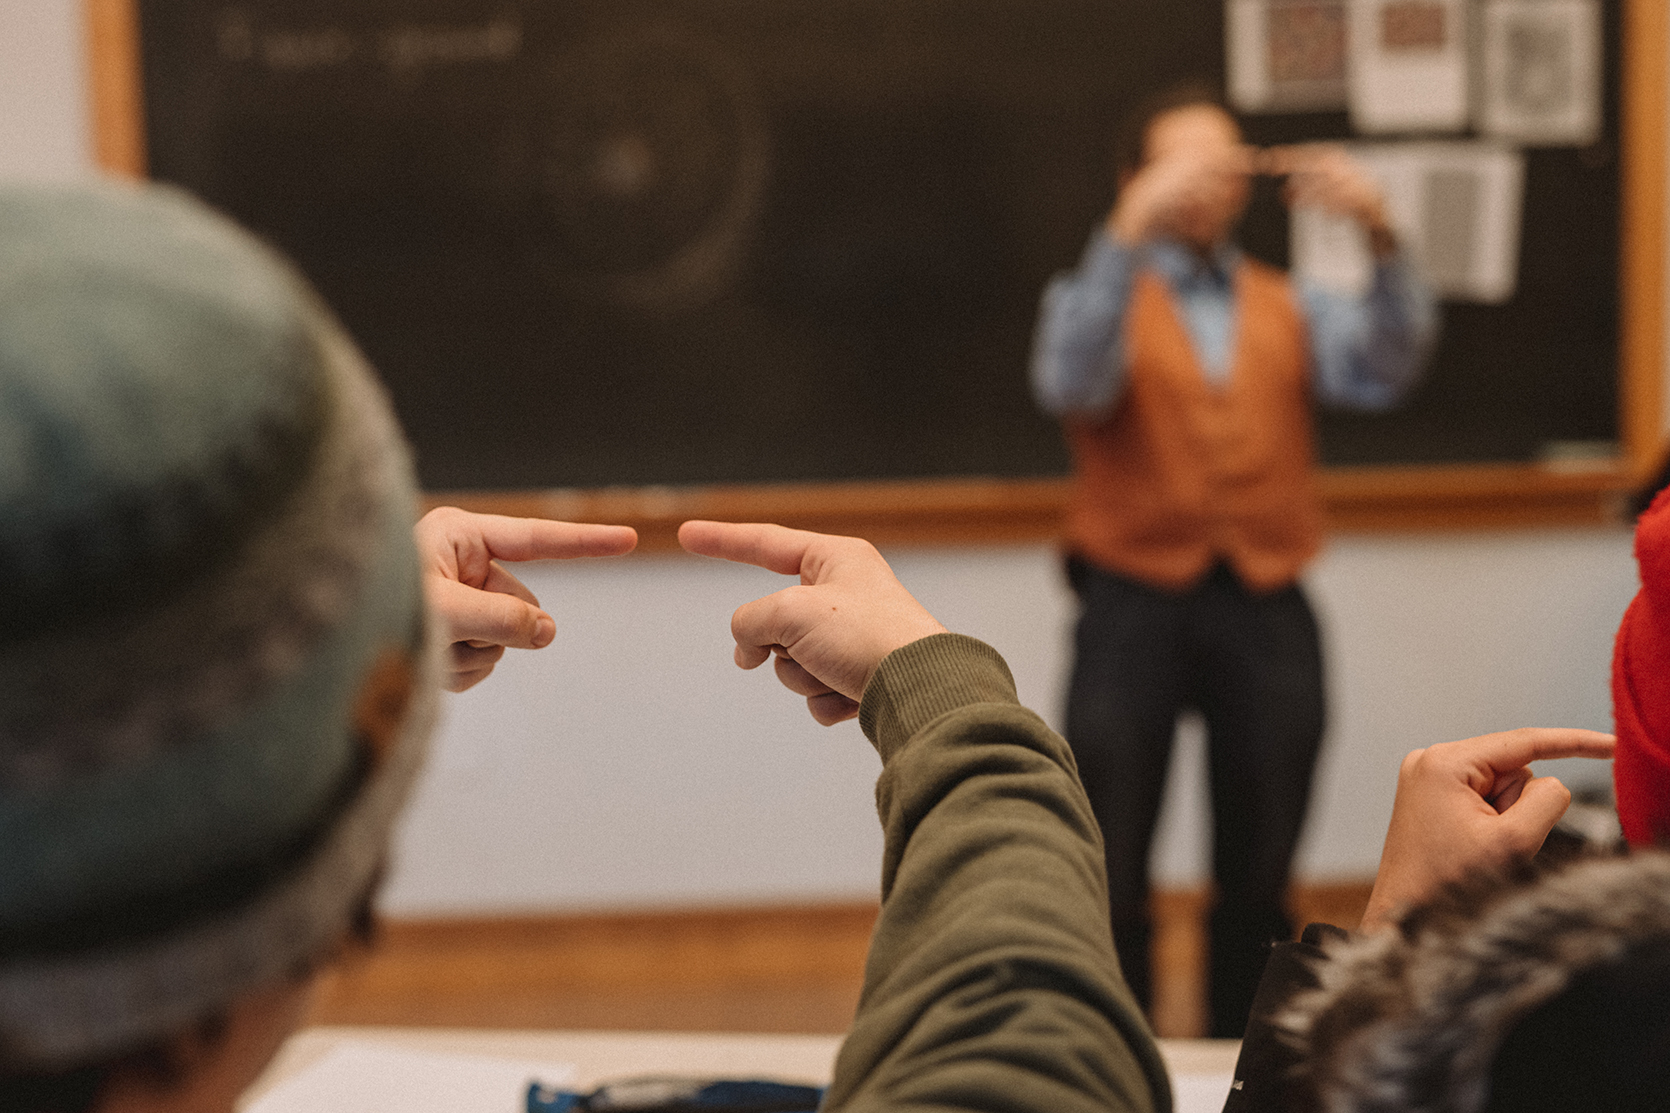 Student in foreground holding two index fingers pointing toward one another in front of their face; teacher in background demonstrating the same action